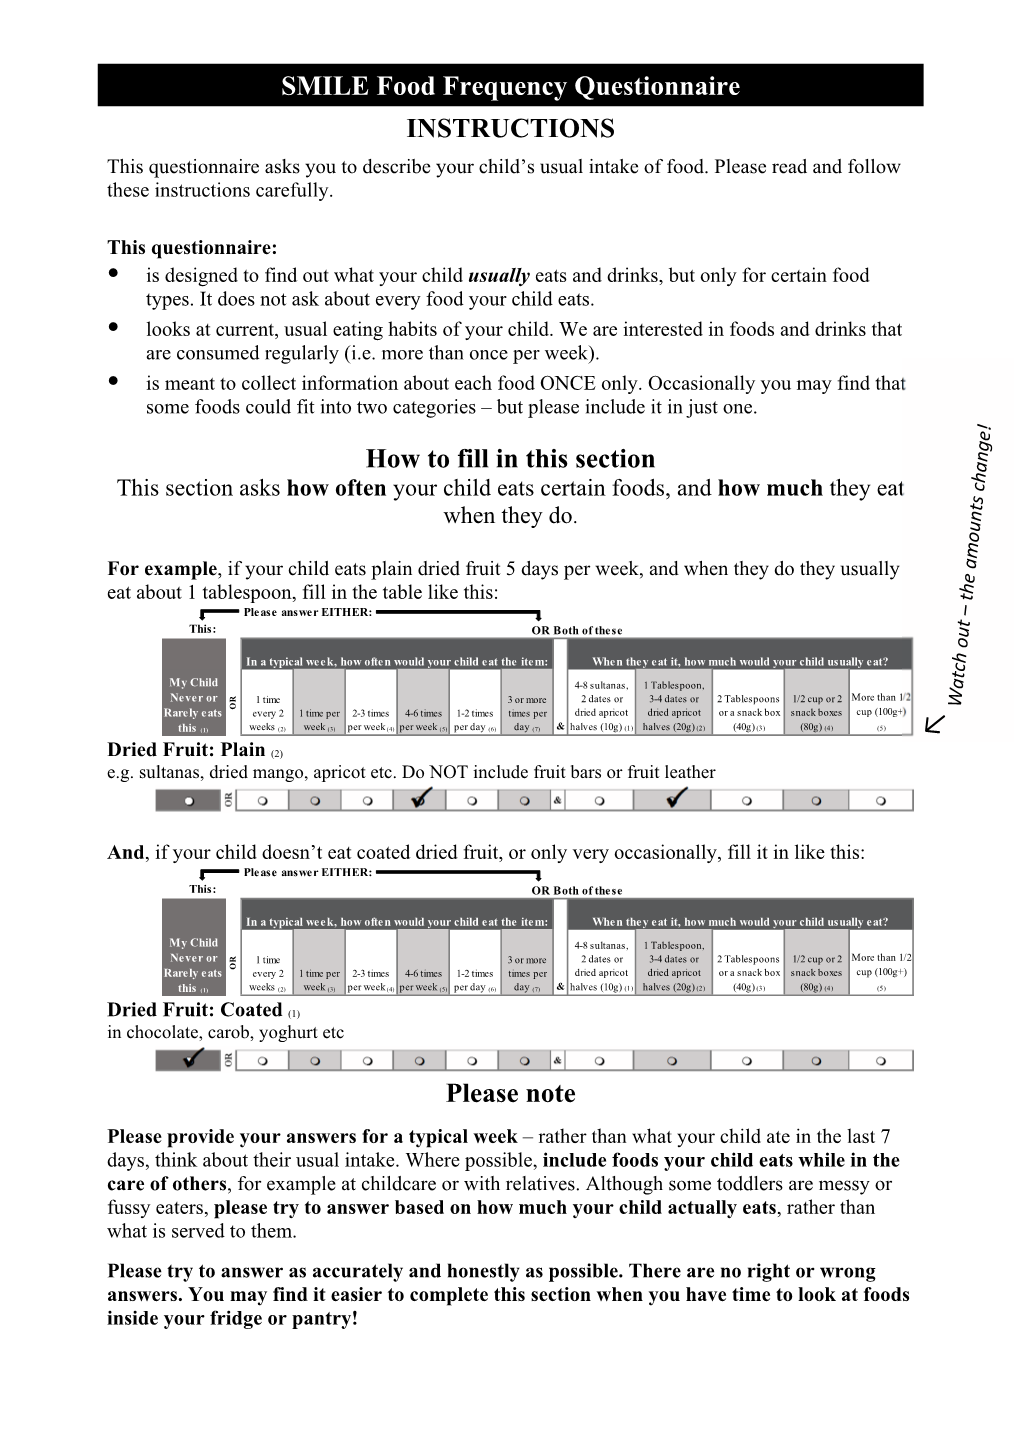 SMILE Food Frequency Questionnaire INSTRUCTIONS How to Fill in This